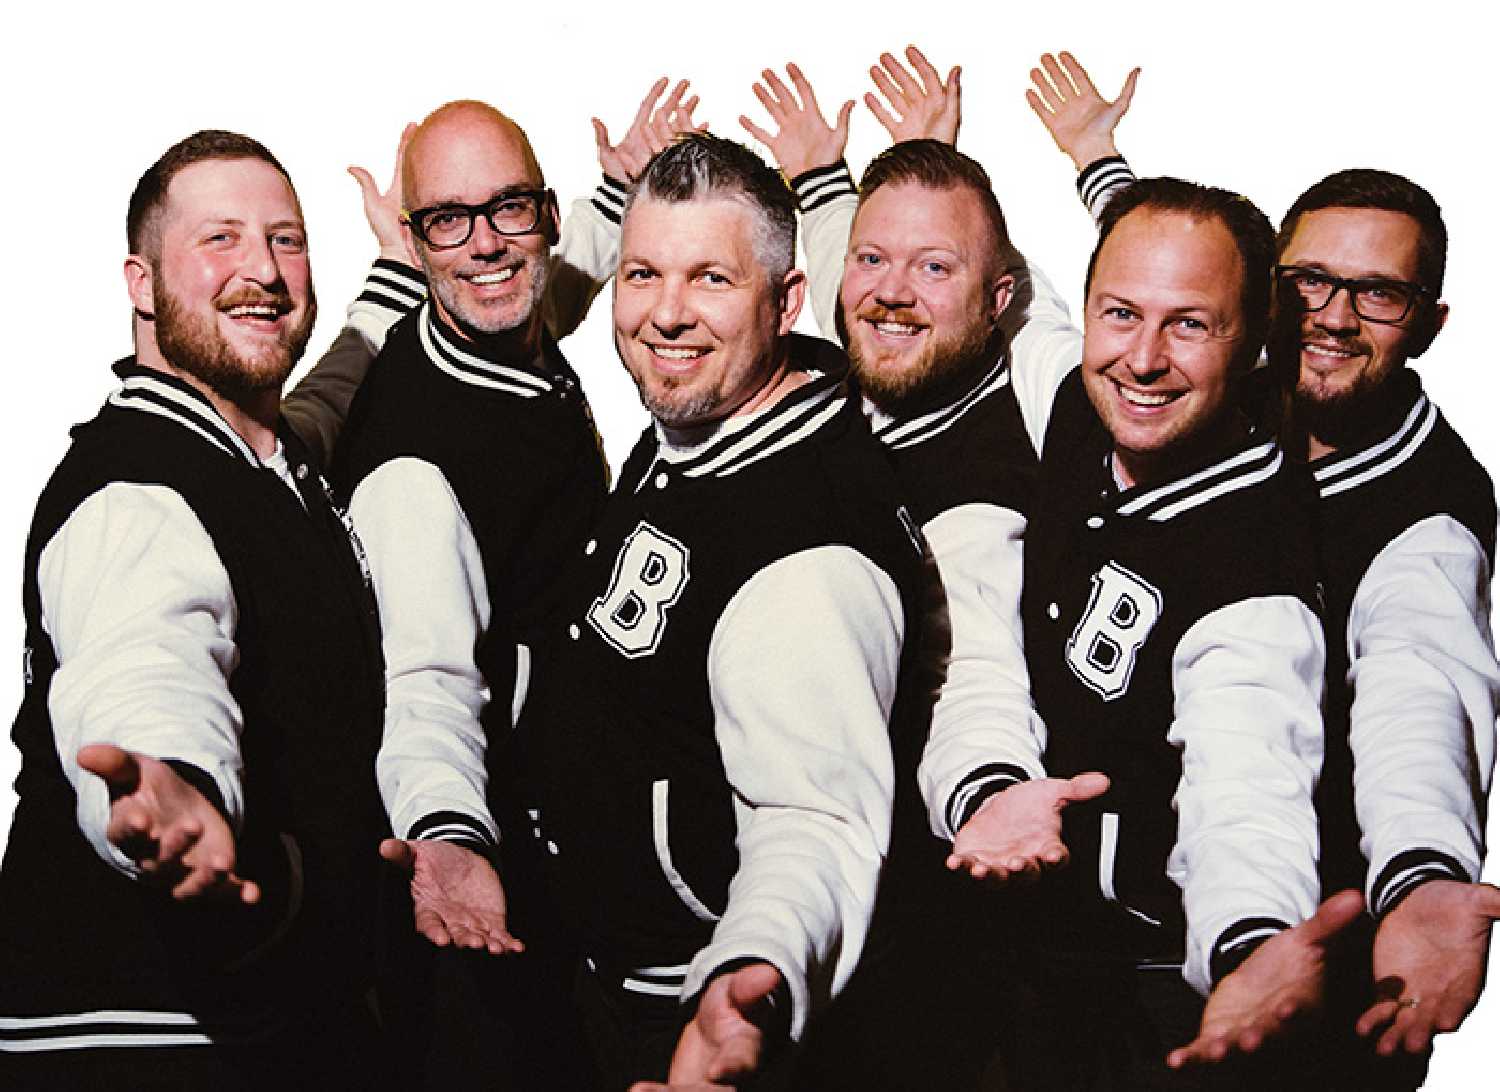 The Bromantics will be performing in Maryfield on Feb. 4 as a fundraising concert for the Maryfield Auditorium. 